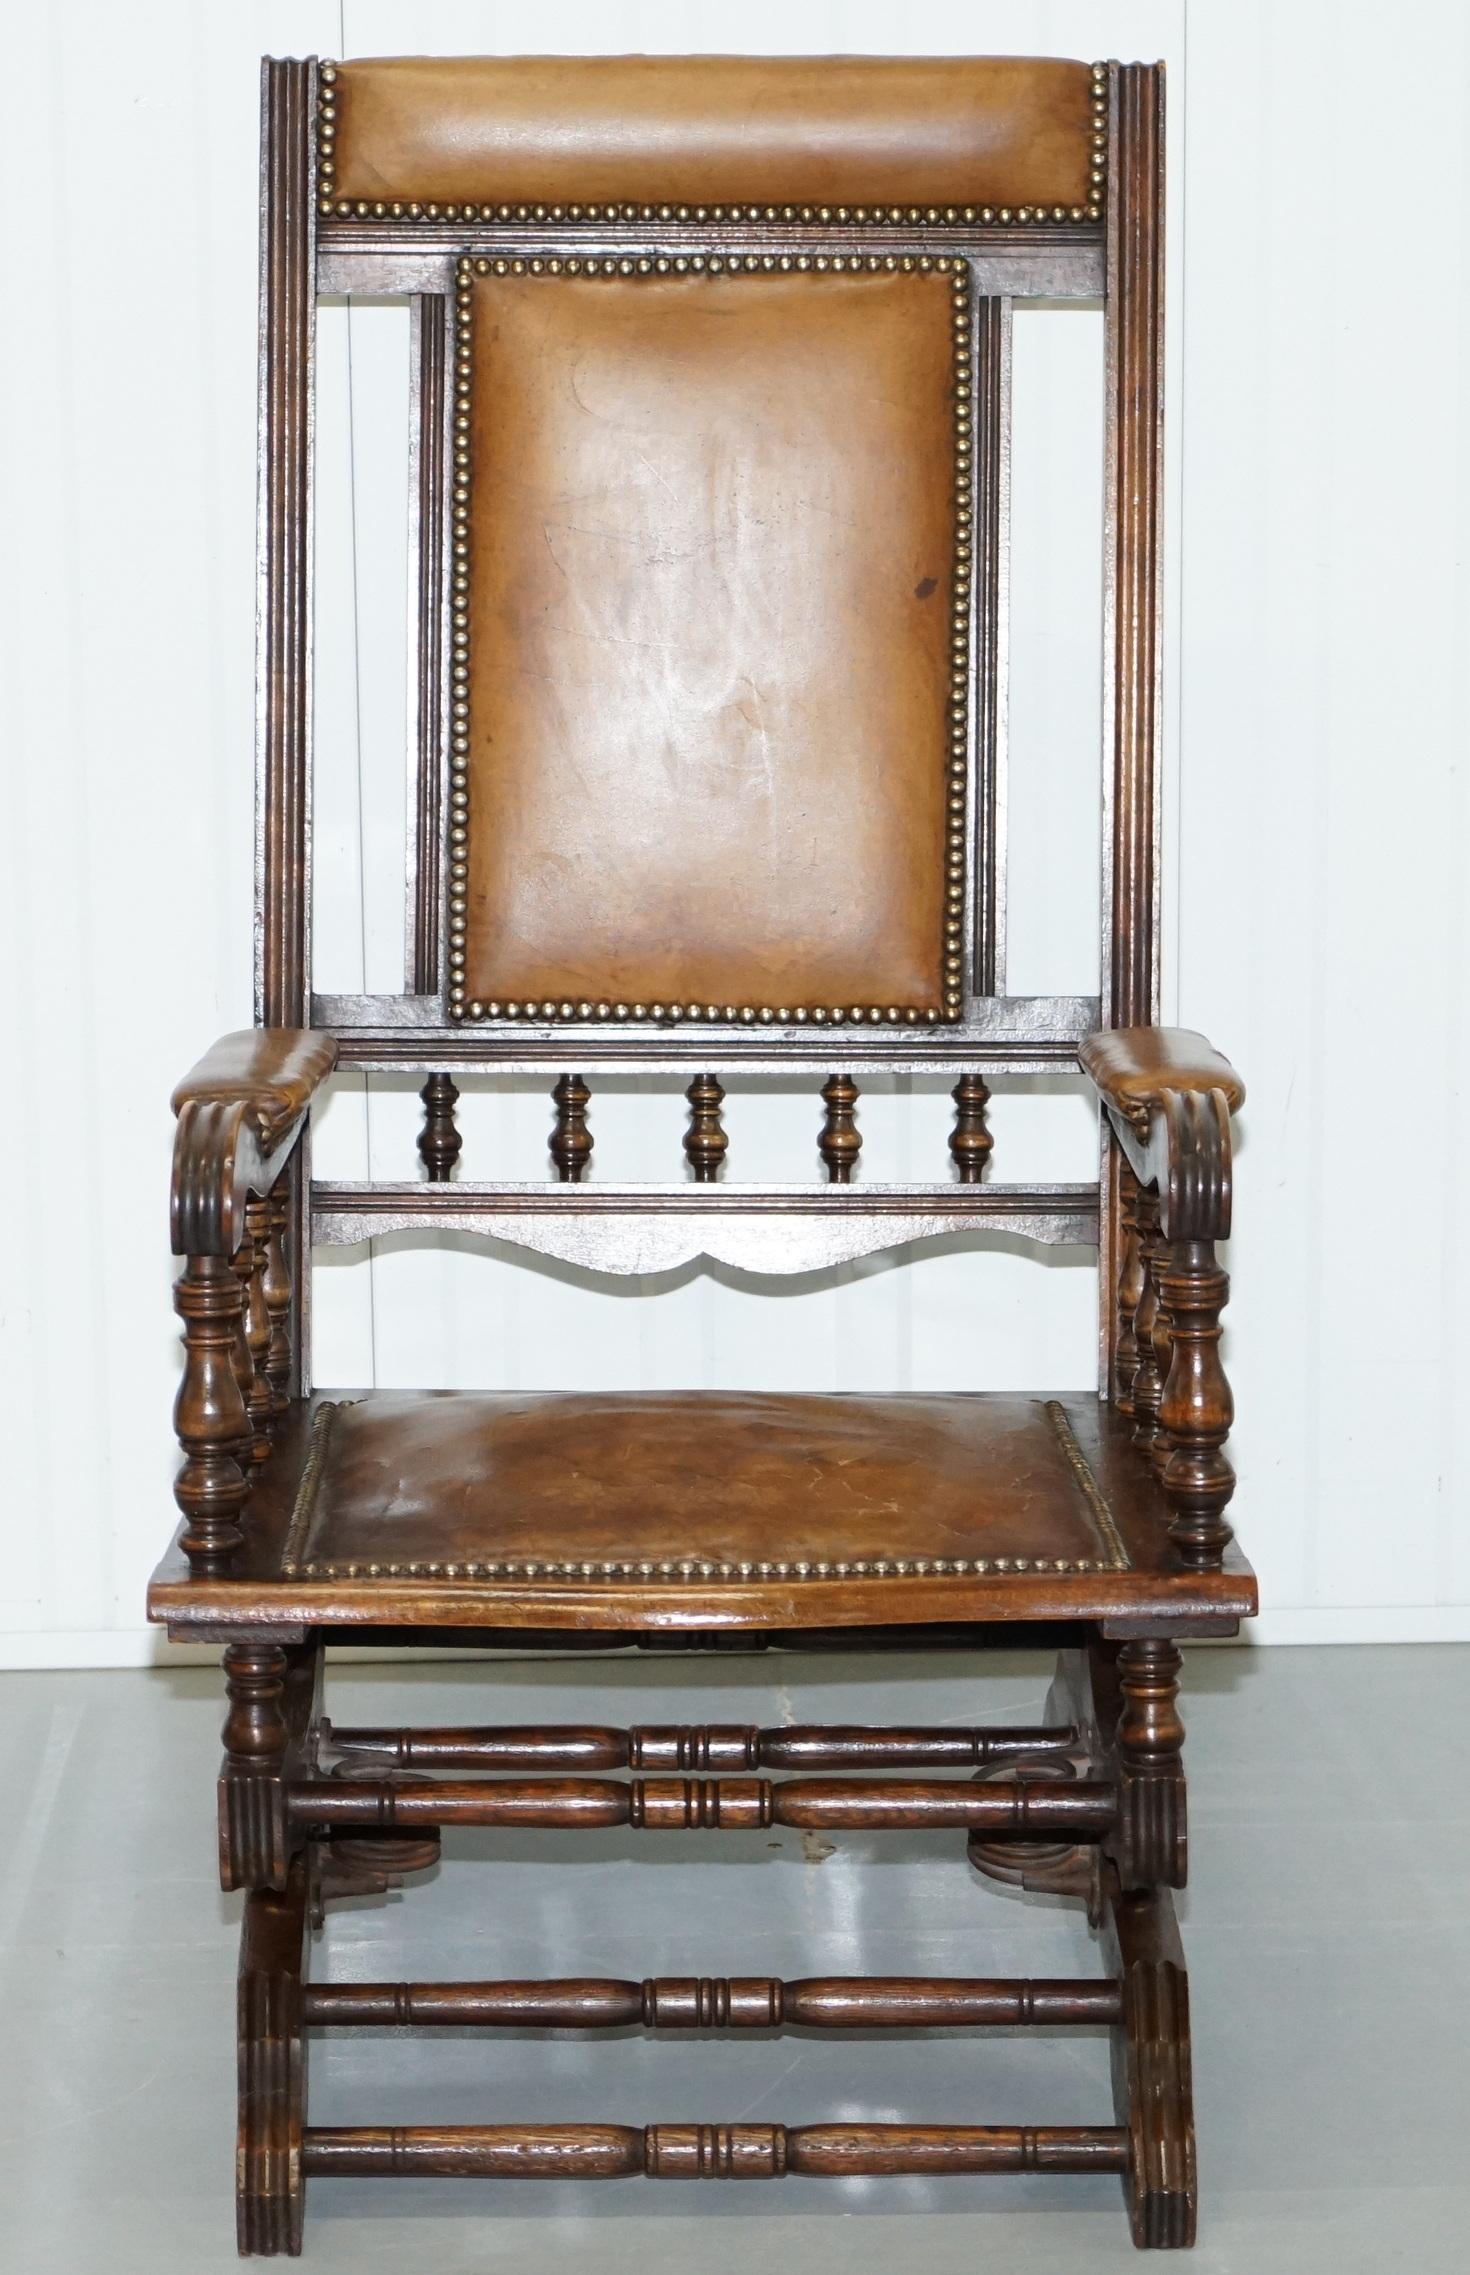 We are delighted to offer for sale this lovely Victorian American aged brown leather mahogany rocking armchair

A good-looking well made and comfortable chair, you can tell the American rockers as they have these little double springs either side